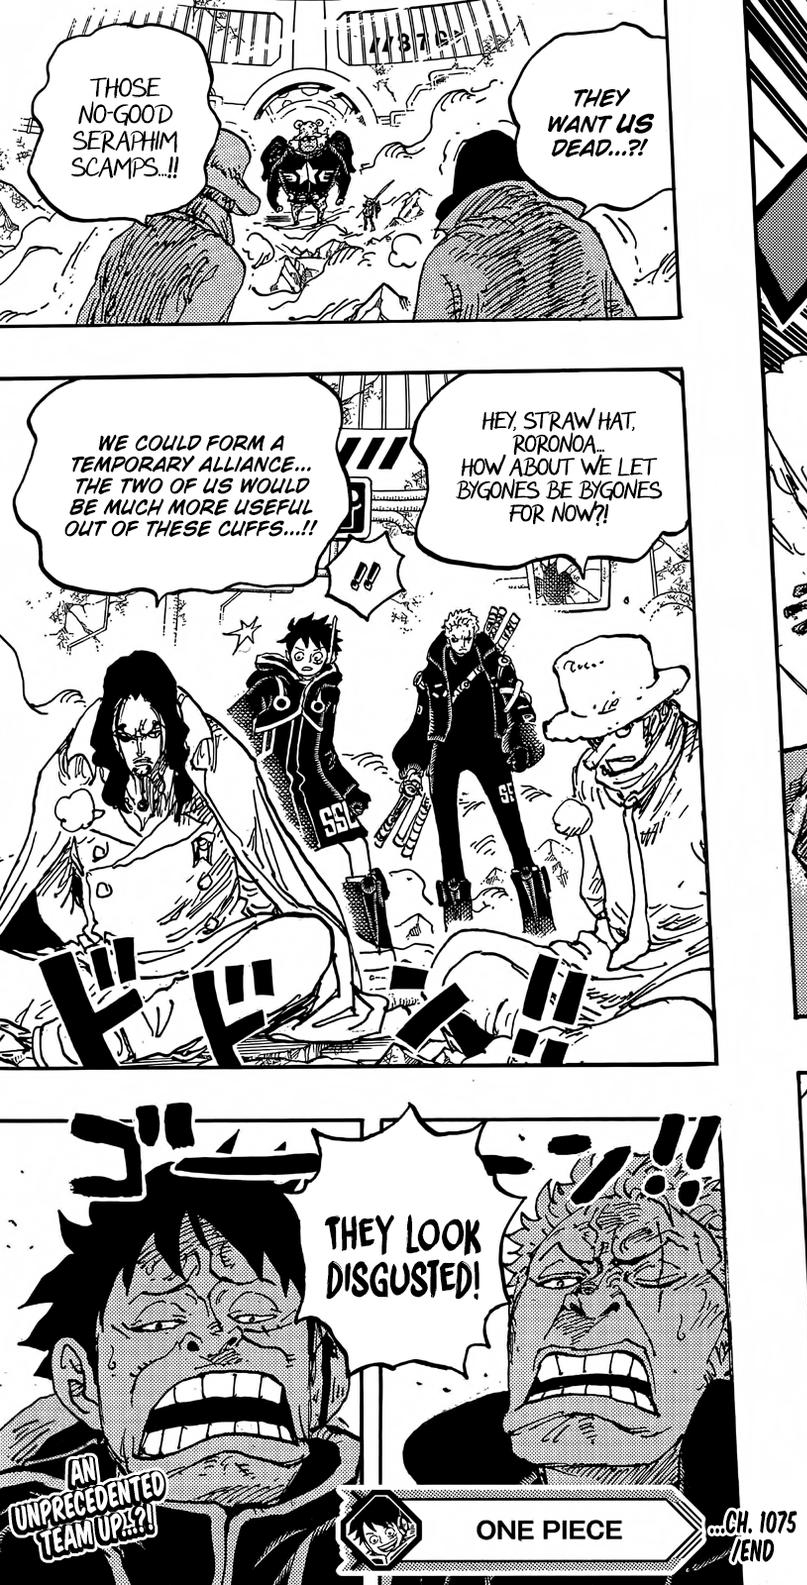 One Piece Chapter 1075 Let's Split Up, Gang! [One Piece 1075] | Mammoth Base Opera Castle